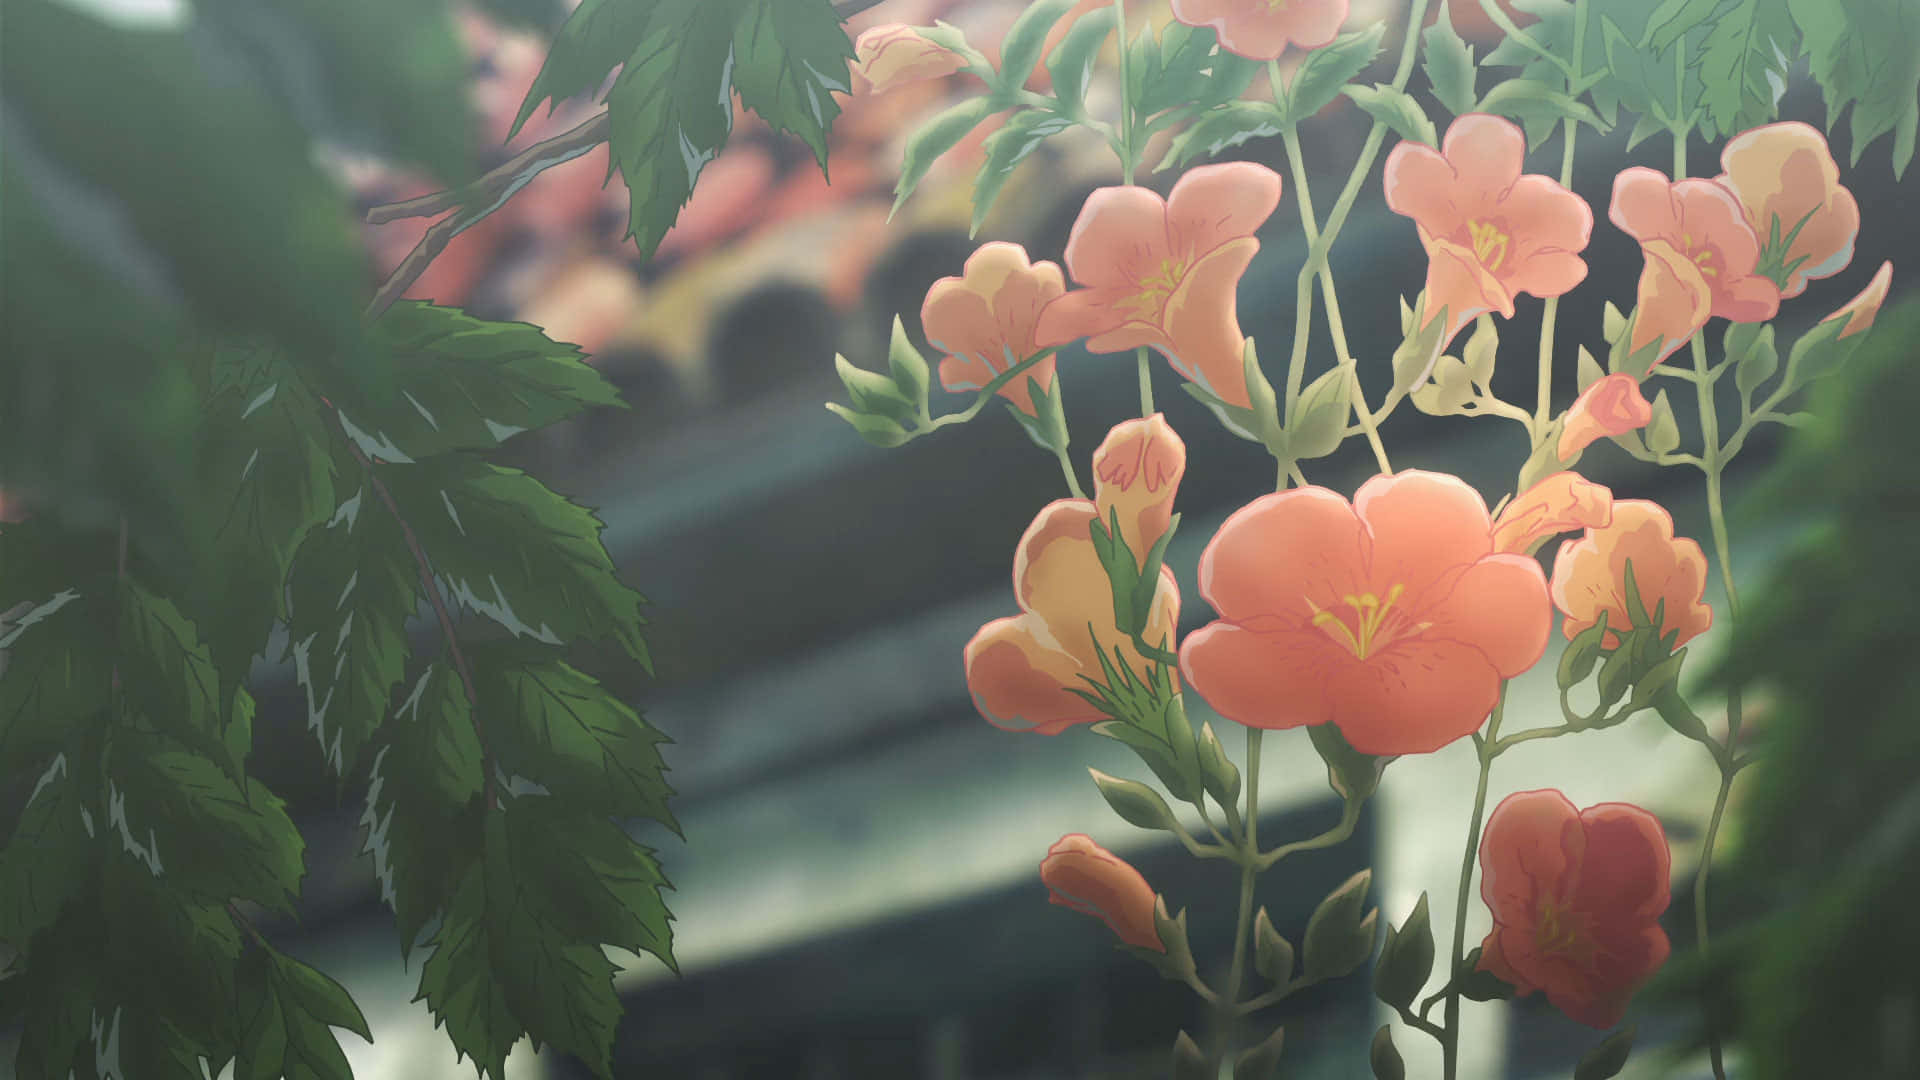 Take a break from the everyday and relax to lo-fi anime chill Wallpaper